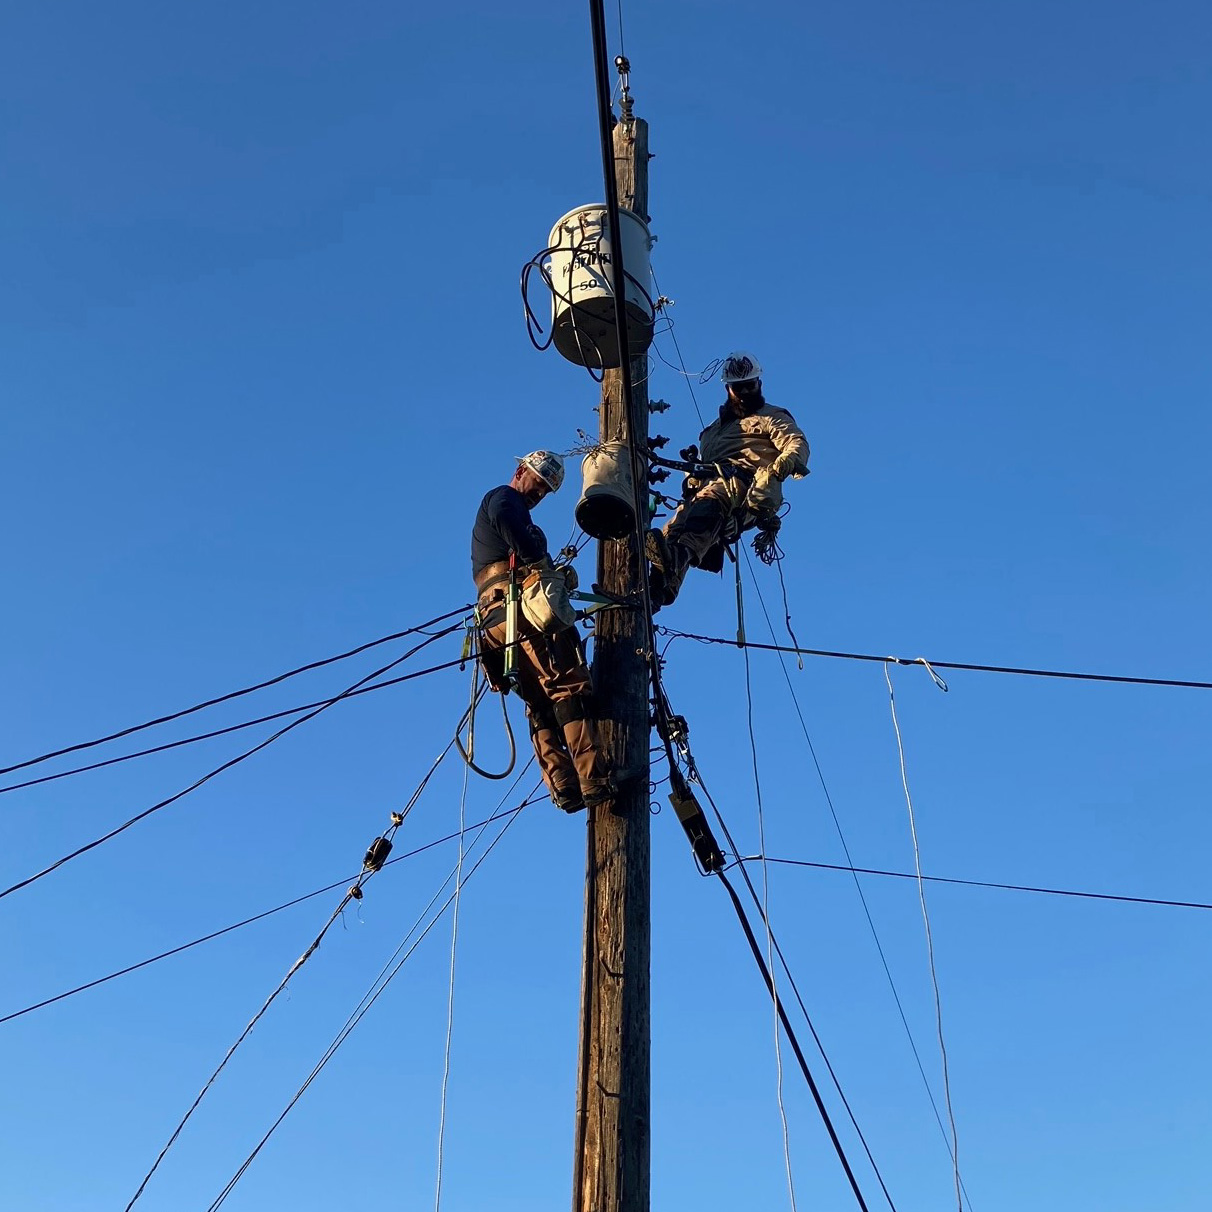 OPPD employees repairing lines on pole